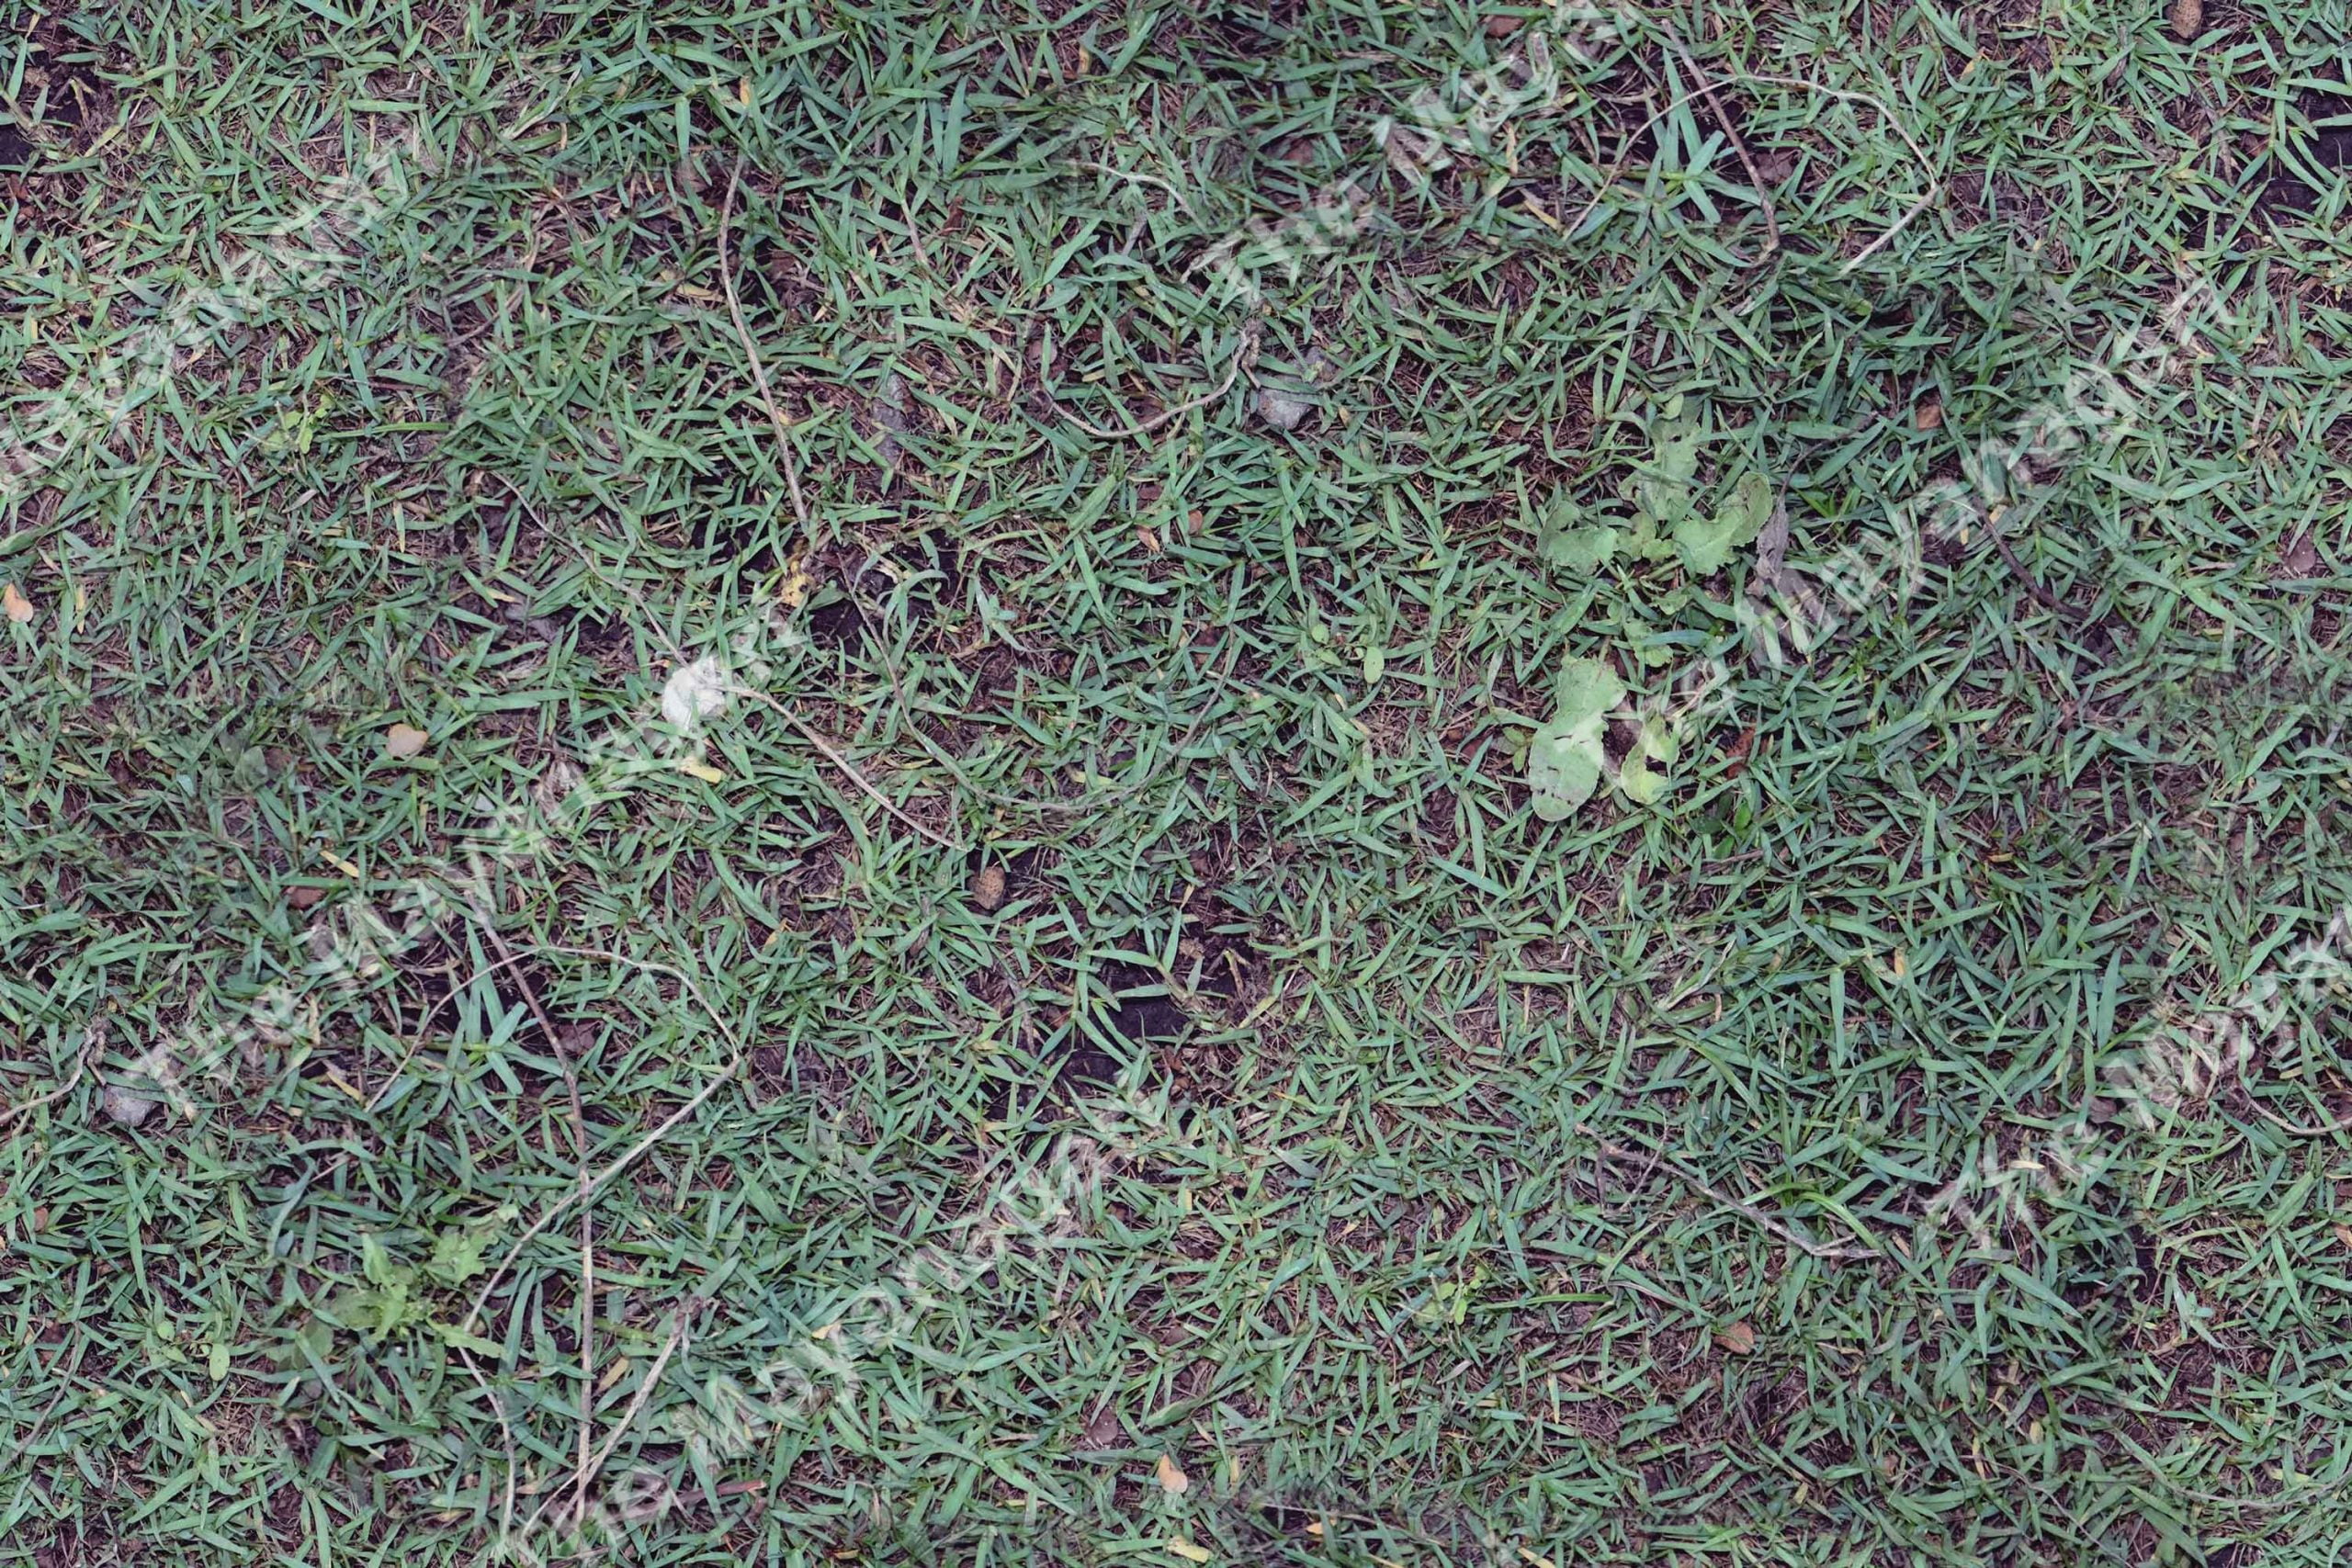 Grass Texture Pattern Pictures Photo Free Download